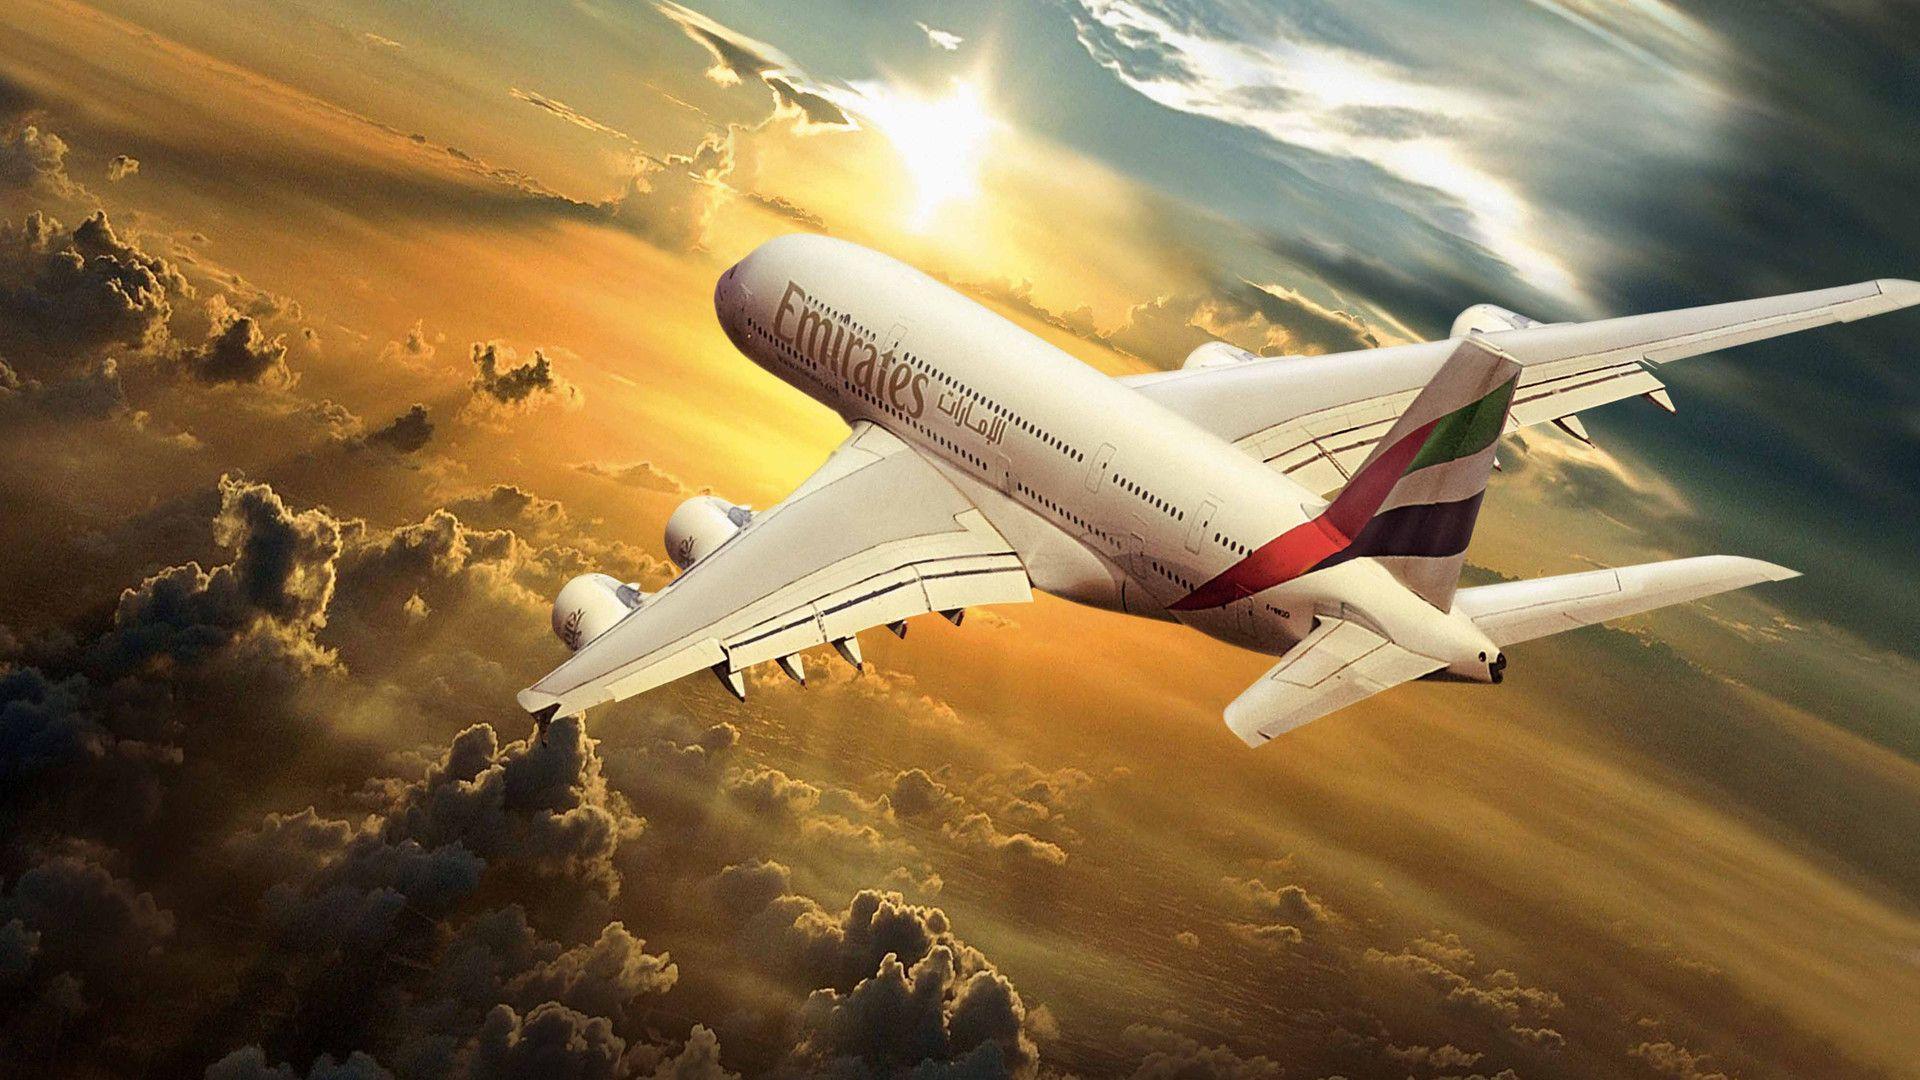 Airbus Emirates Airlines in the sun wallpaper and image